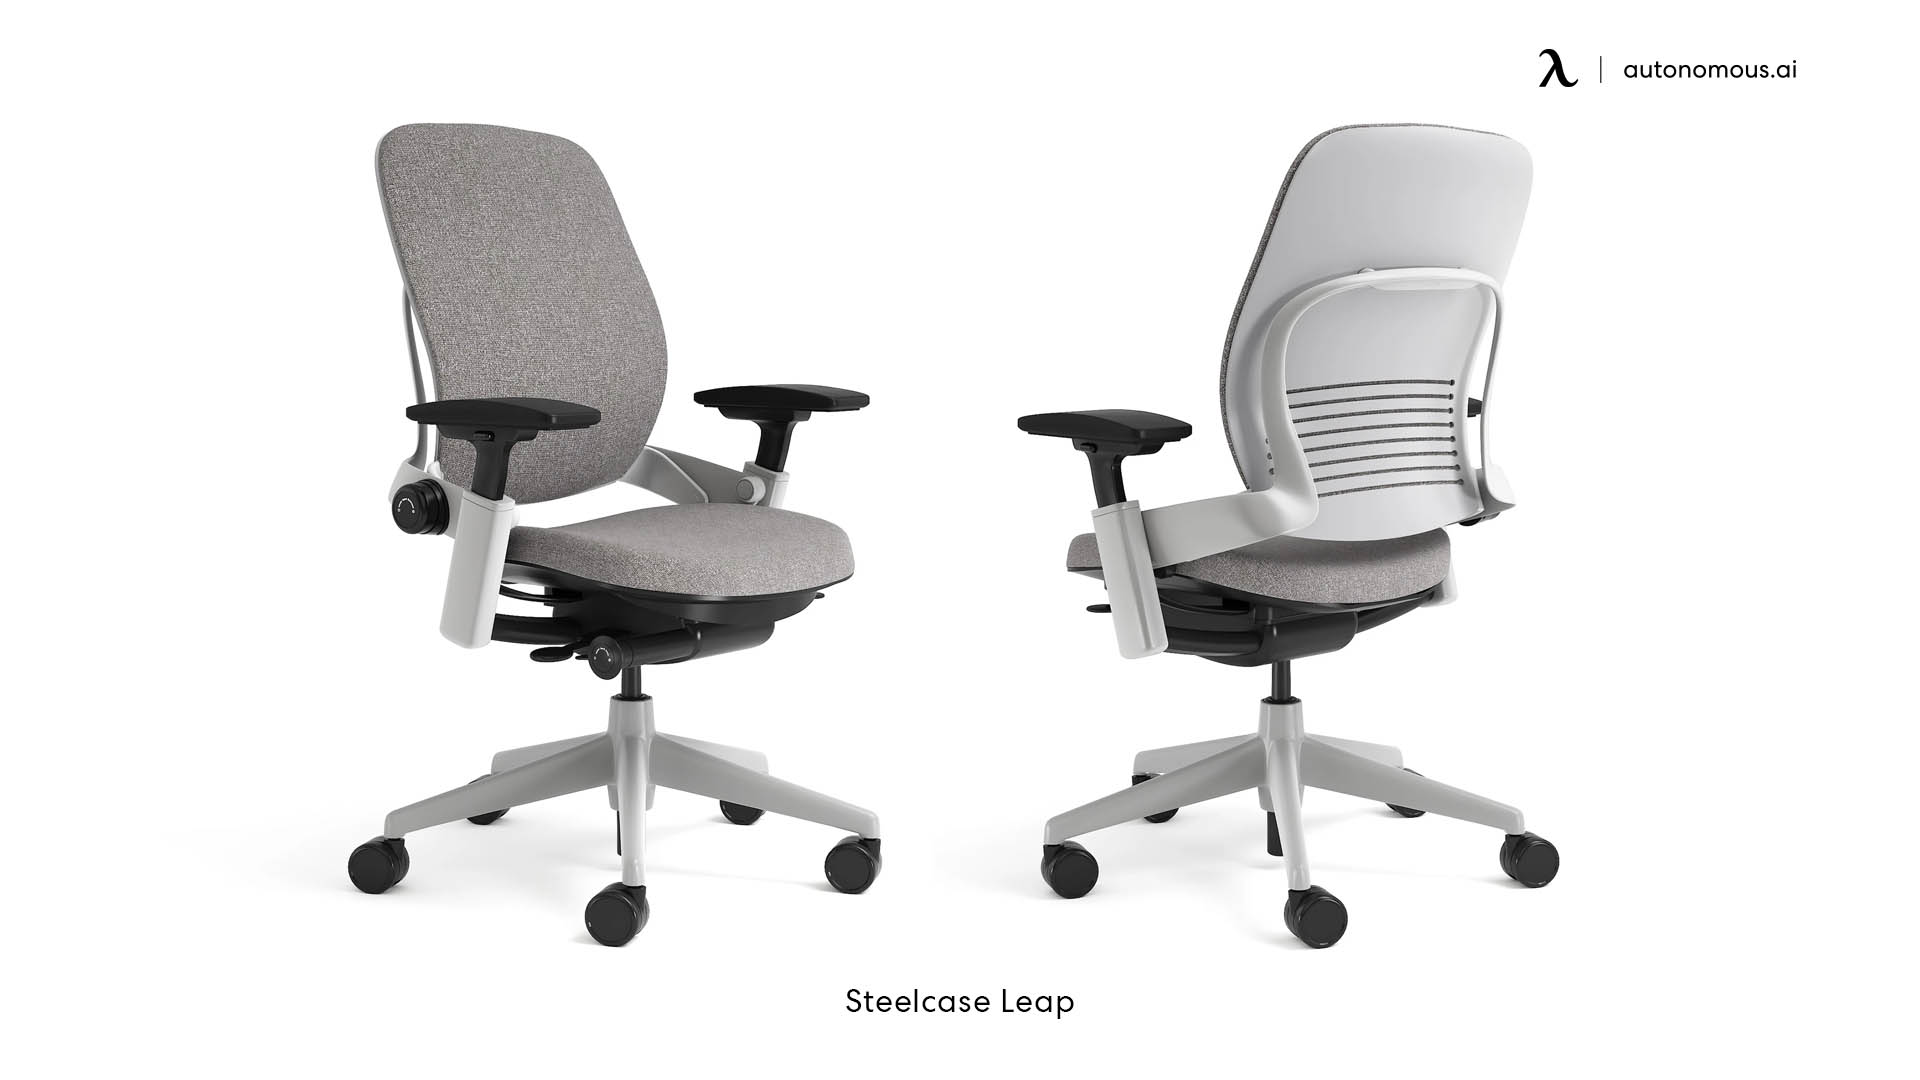 Steelcase's Leap Fabric Chair